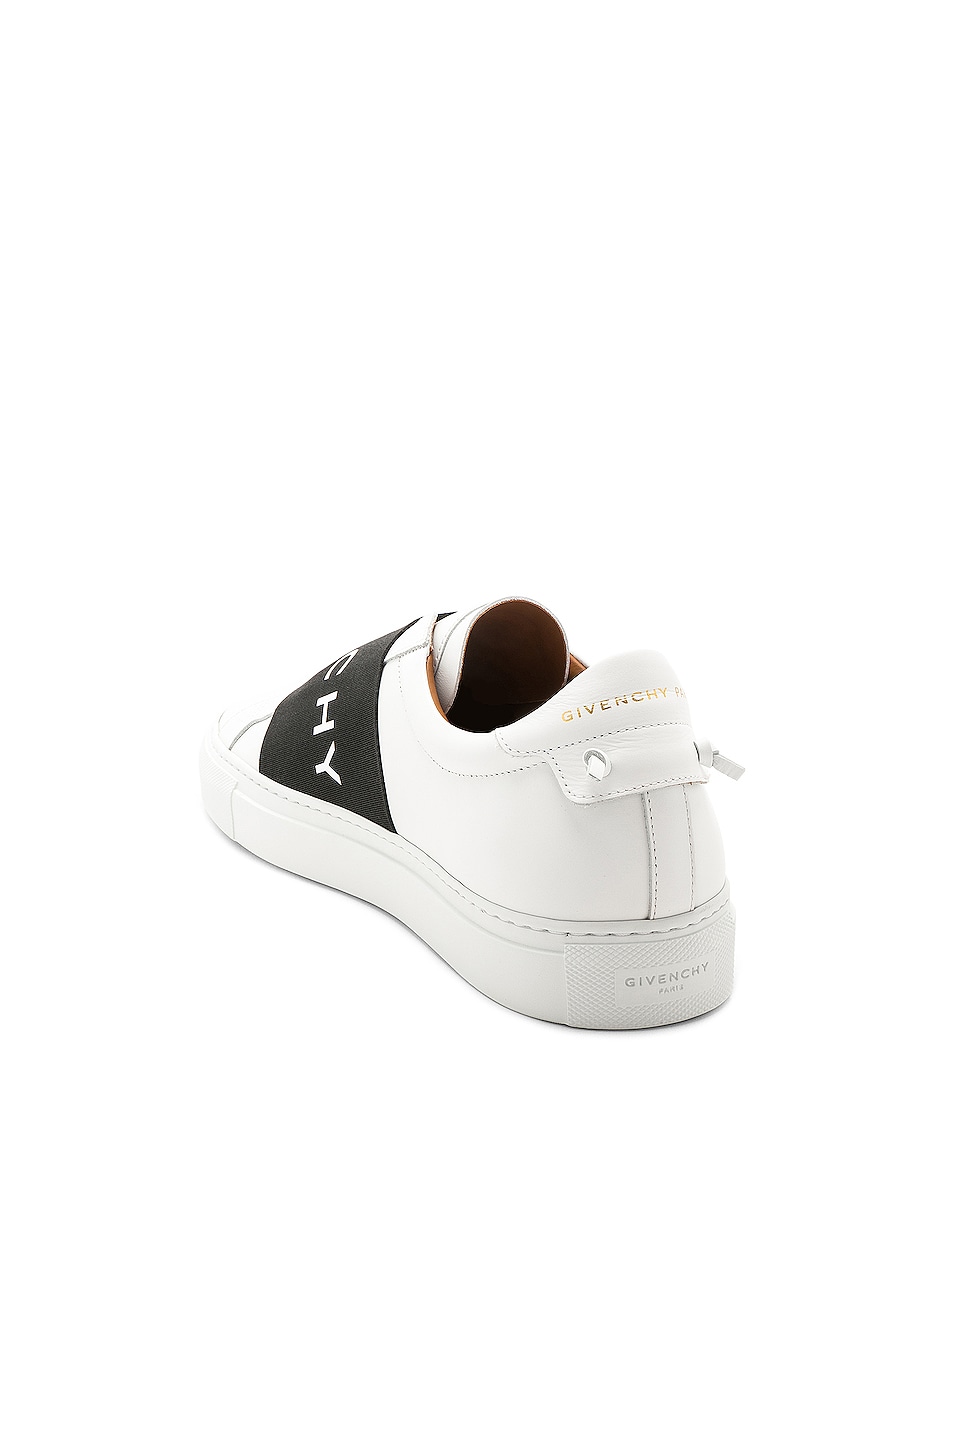 Givenchy Elastic Sneakers in White & Black | FWRD